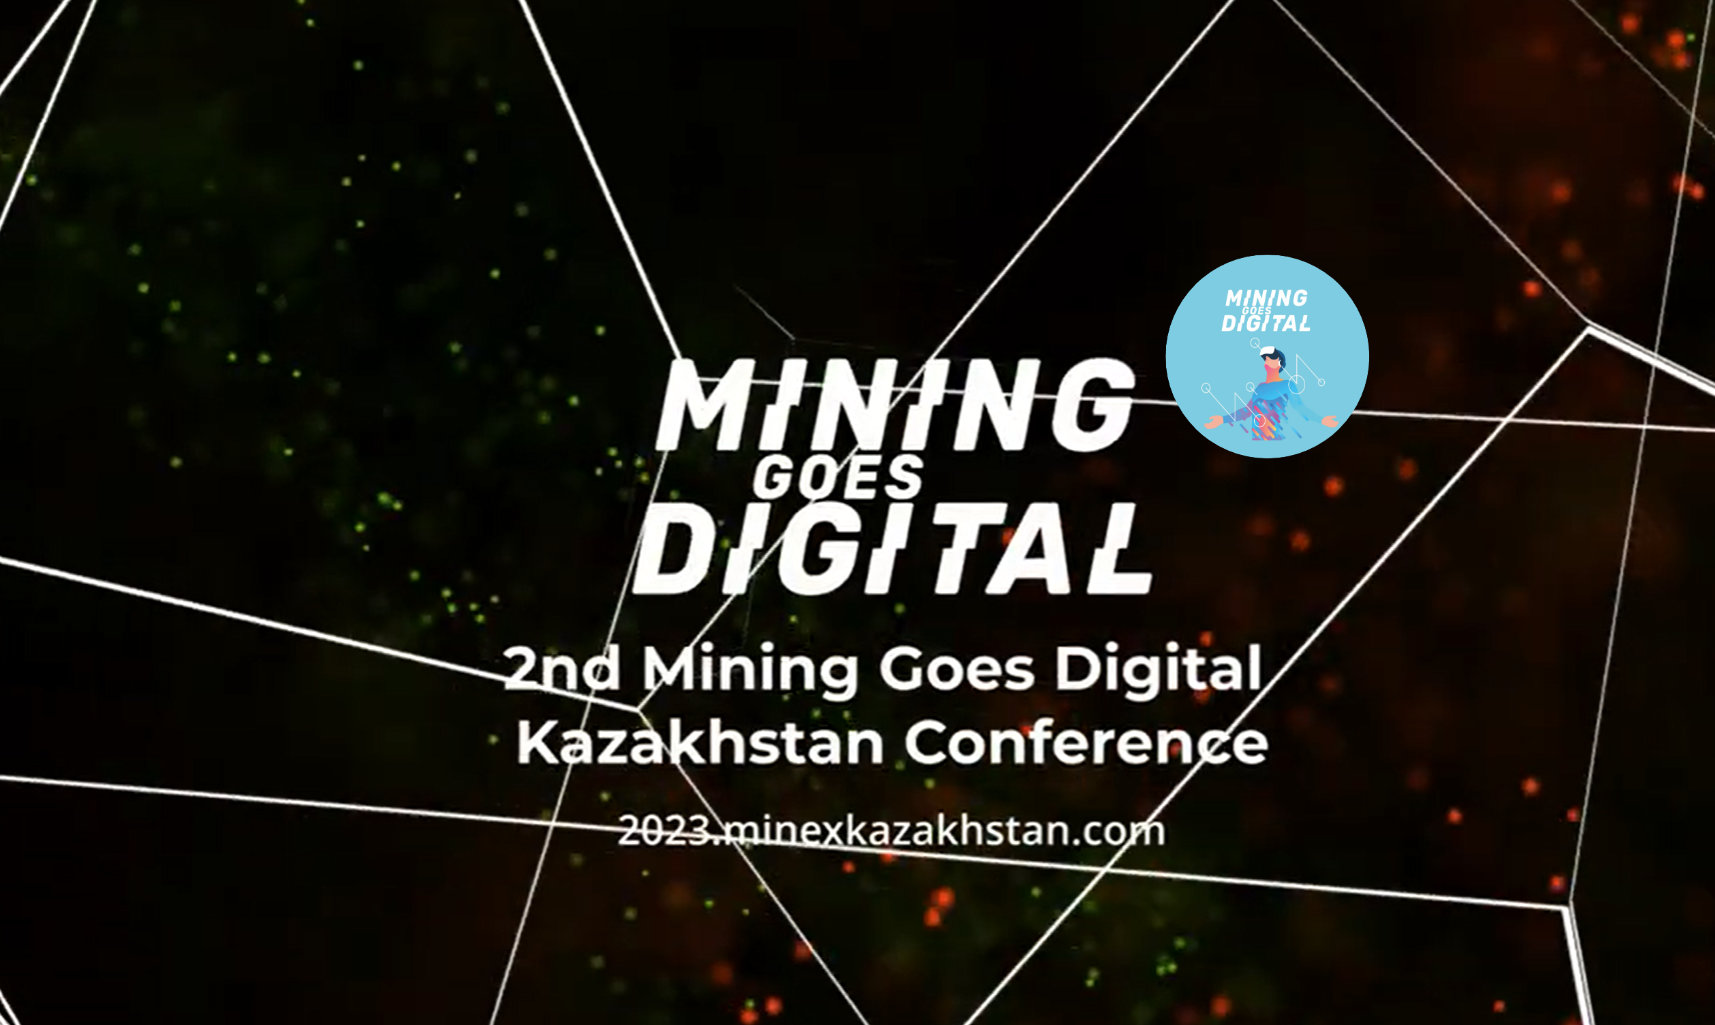 Digital Transformation in Kazakhstan’s Mining Industry will be addressed at the 2nd ‘Mining Goes Digital Kazakhstan’ Conference